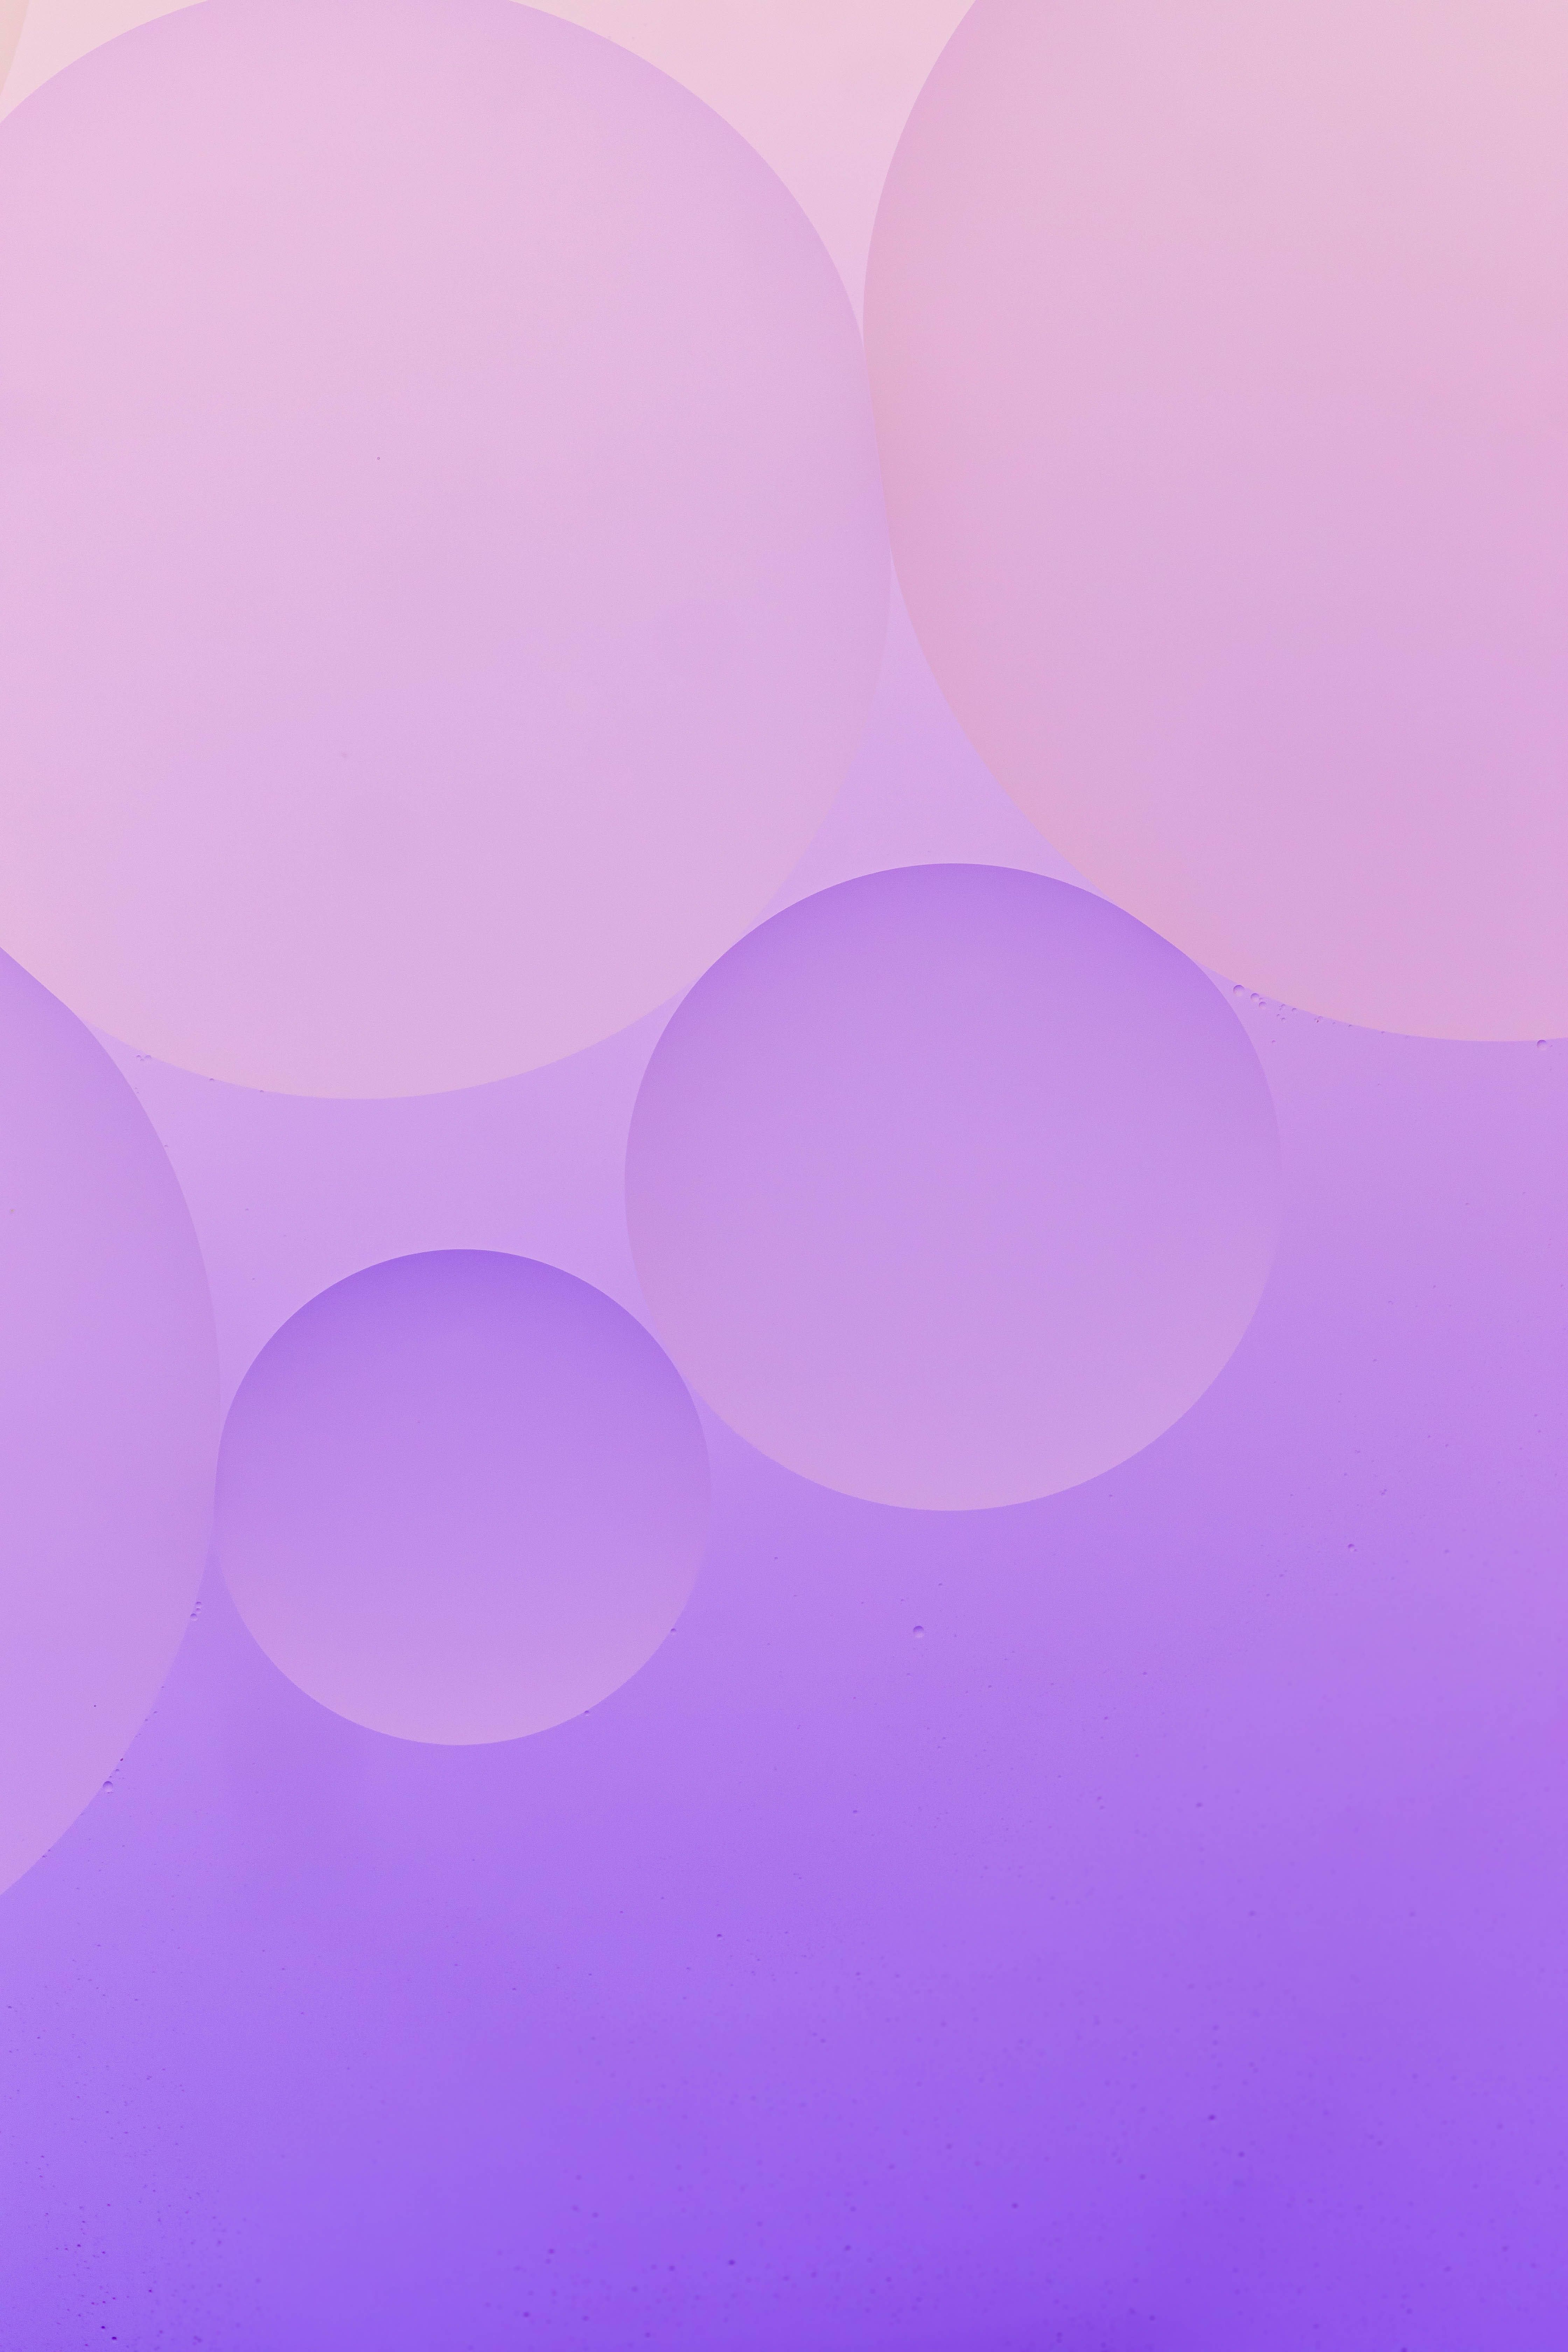 A purple and pink background with bubbles - Bubbles